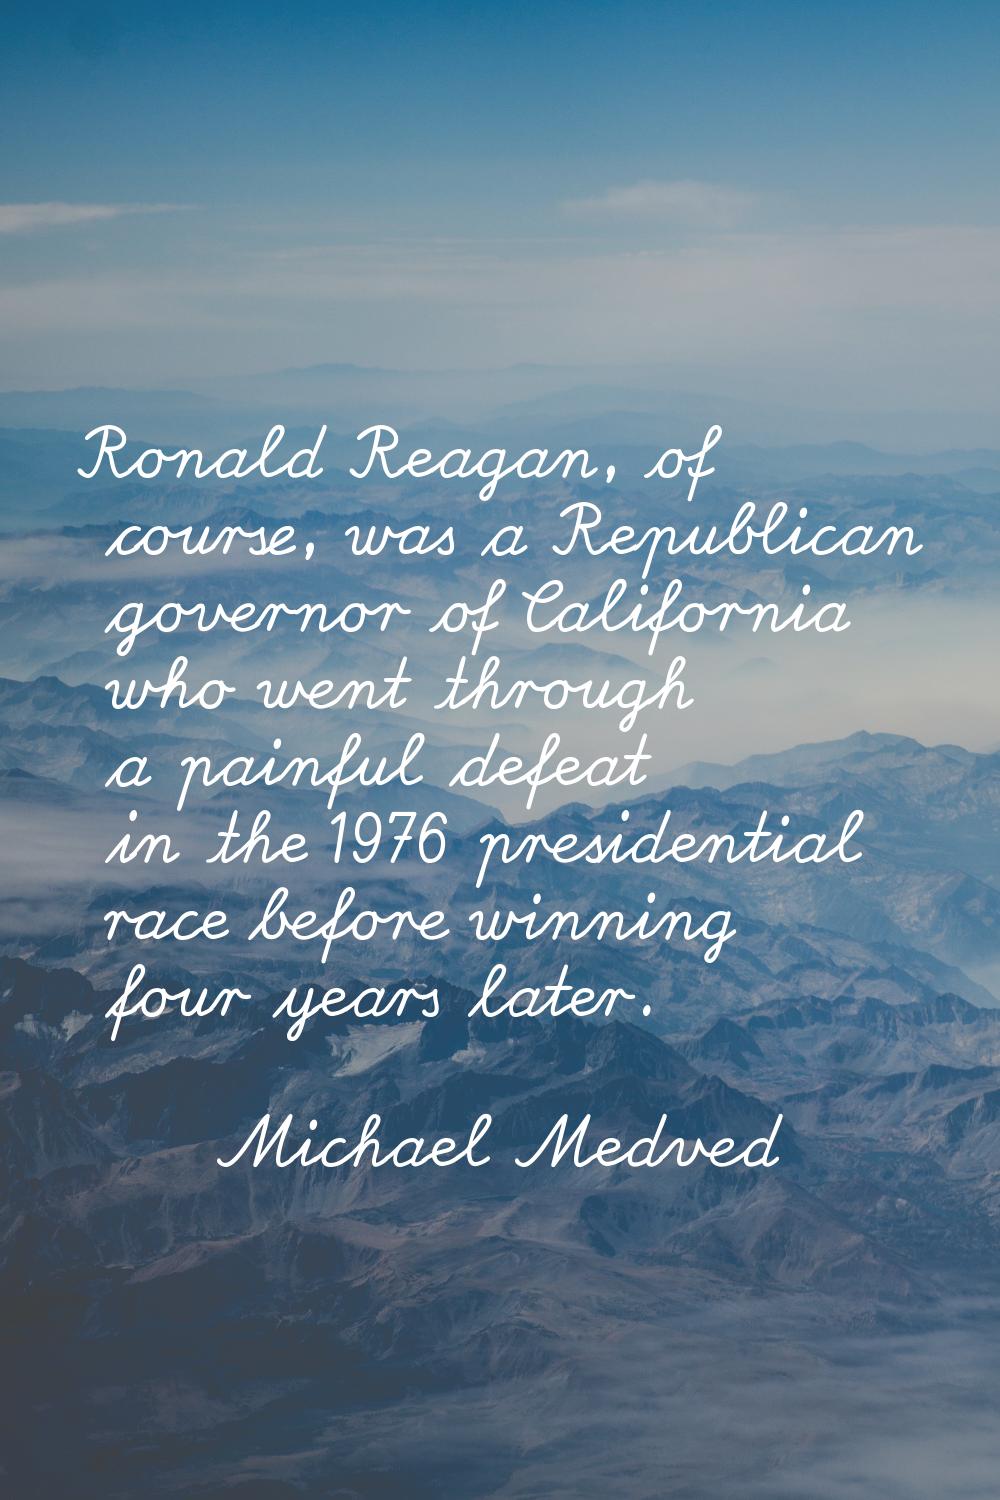 Ronald Reagan, of course, was a Republican governor of California who went through a painful defeat